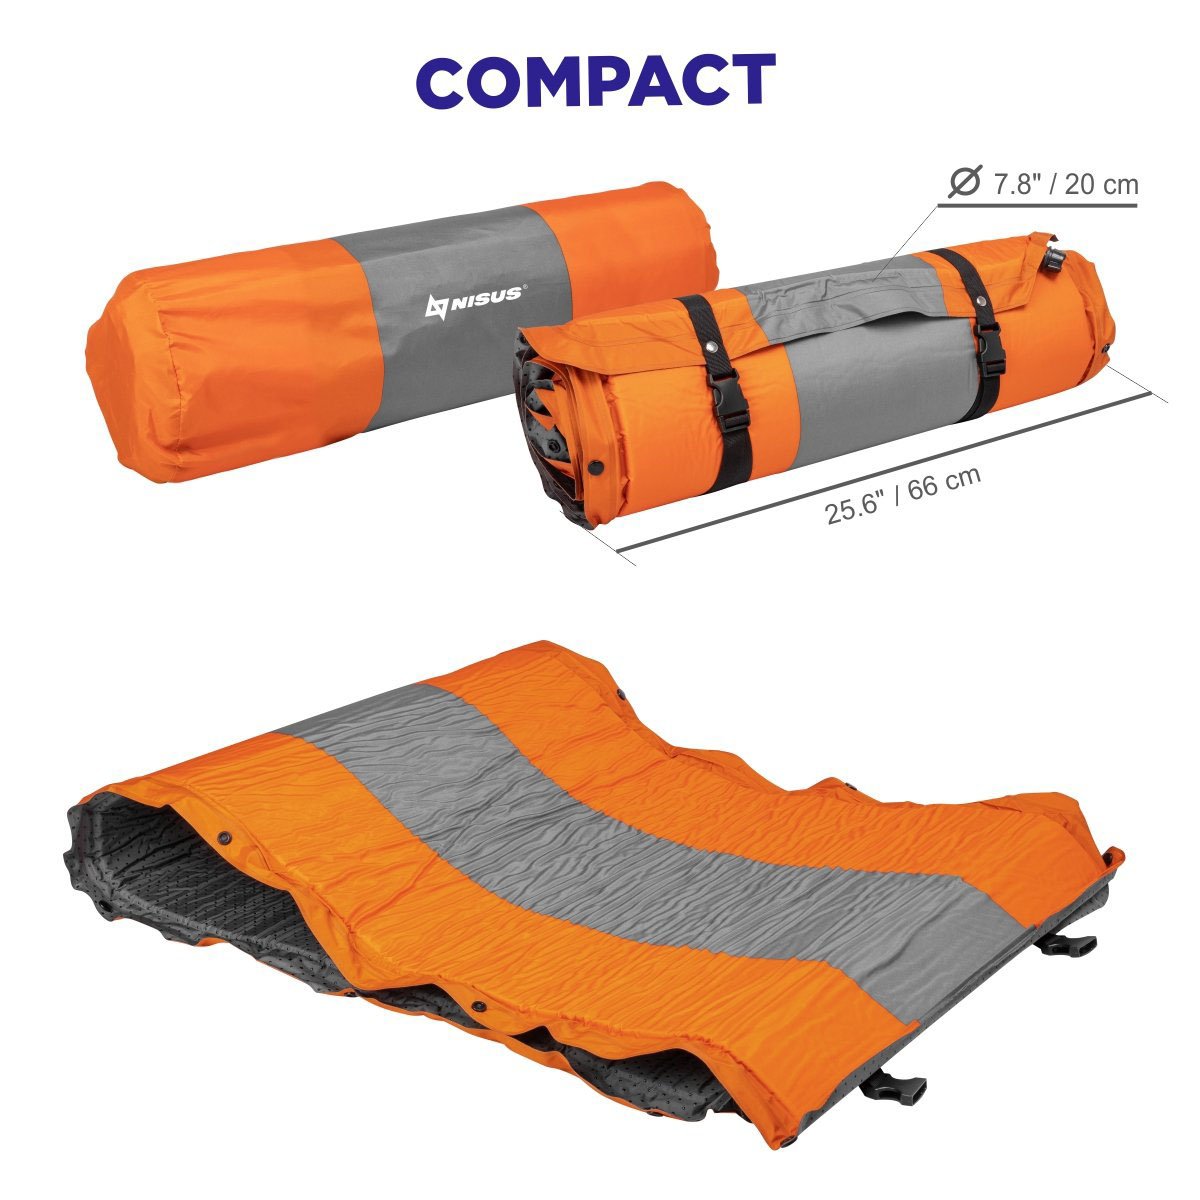 Easy Roll Up and Compact Orange Self Inflating Sleeping Pad for Camping